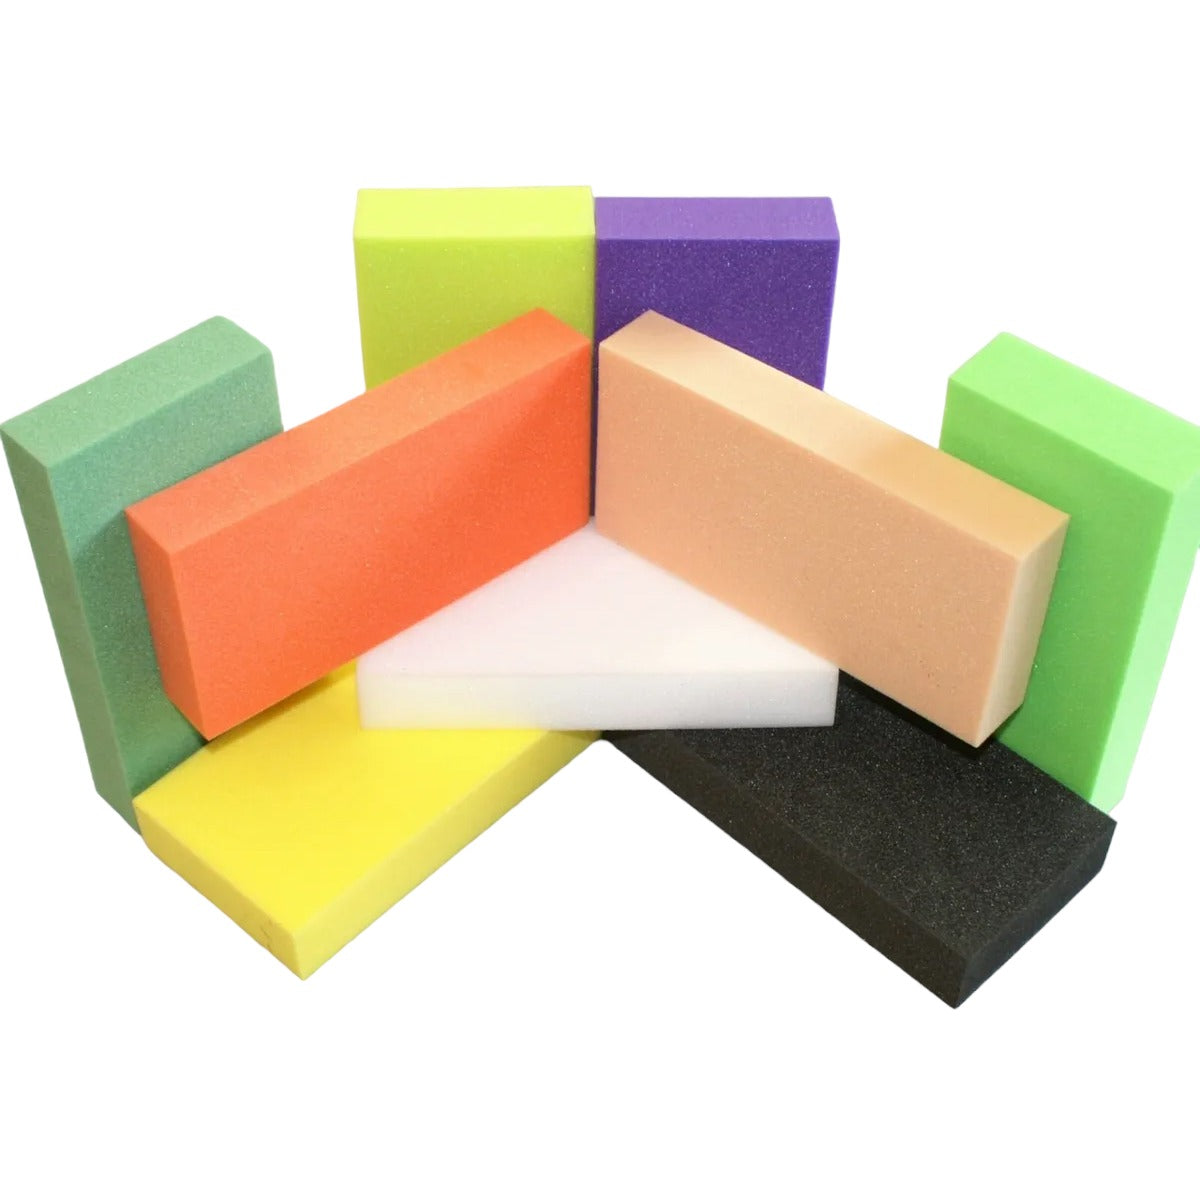 MT Products Hard Foam Blocks (6 Pack) | 4 x 4 x 4 Inch Non-Squishy Craft  Square Foam Cubes | Polystyrene Brick for Arts and Crafts - Made in the USA